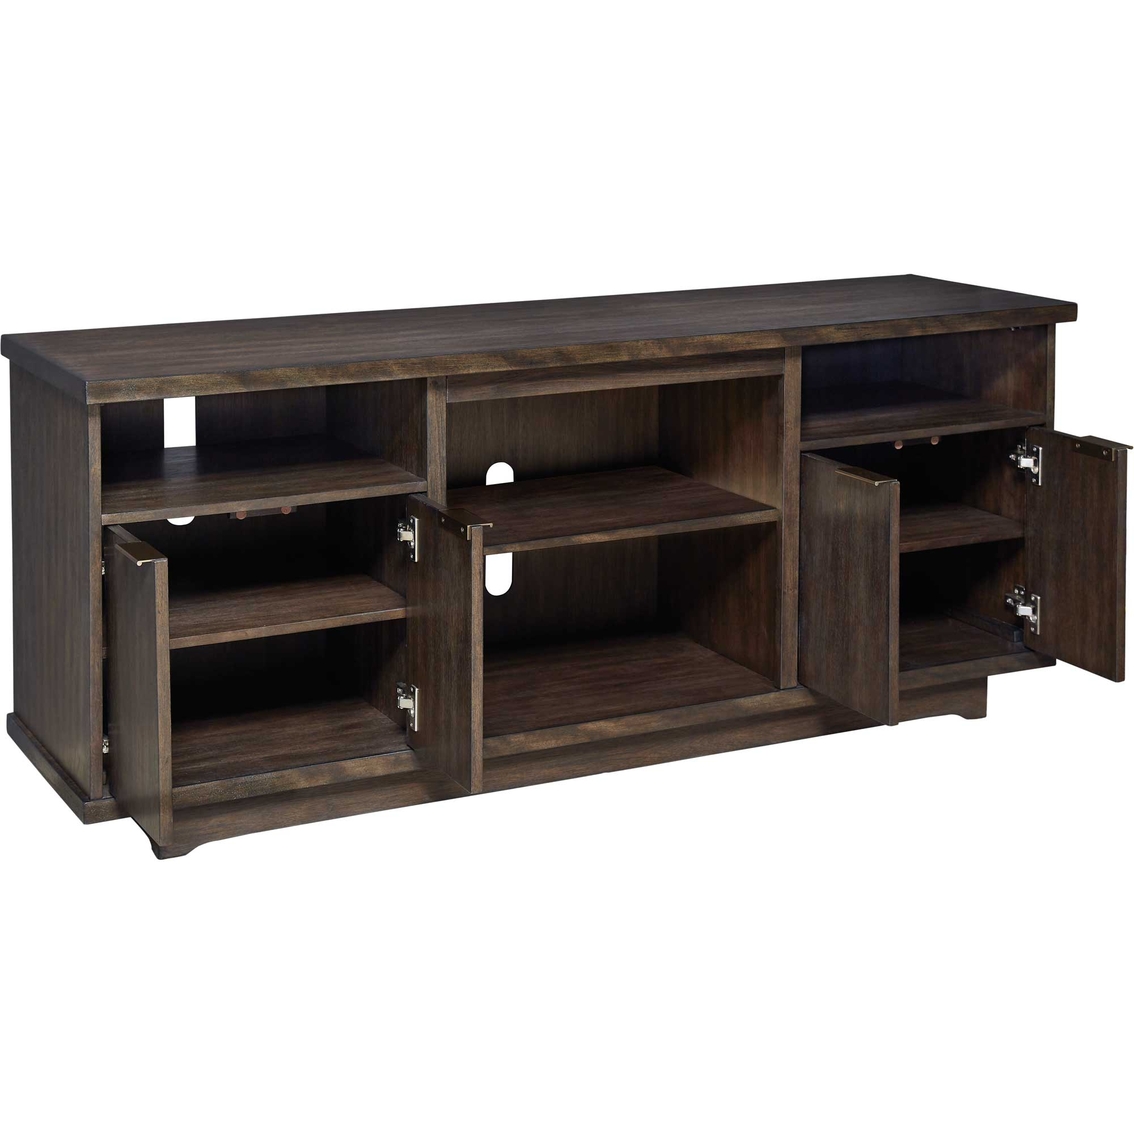 Signature Design by Ashley Brazburn LG TV Stand with Fireplace Insert - Image 4 of 6